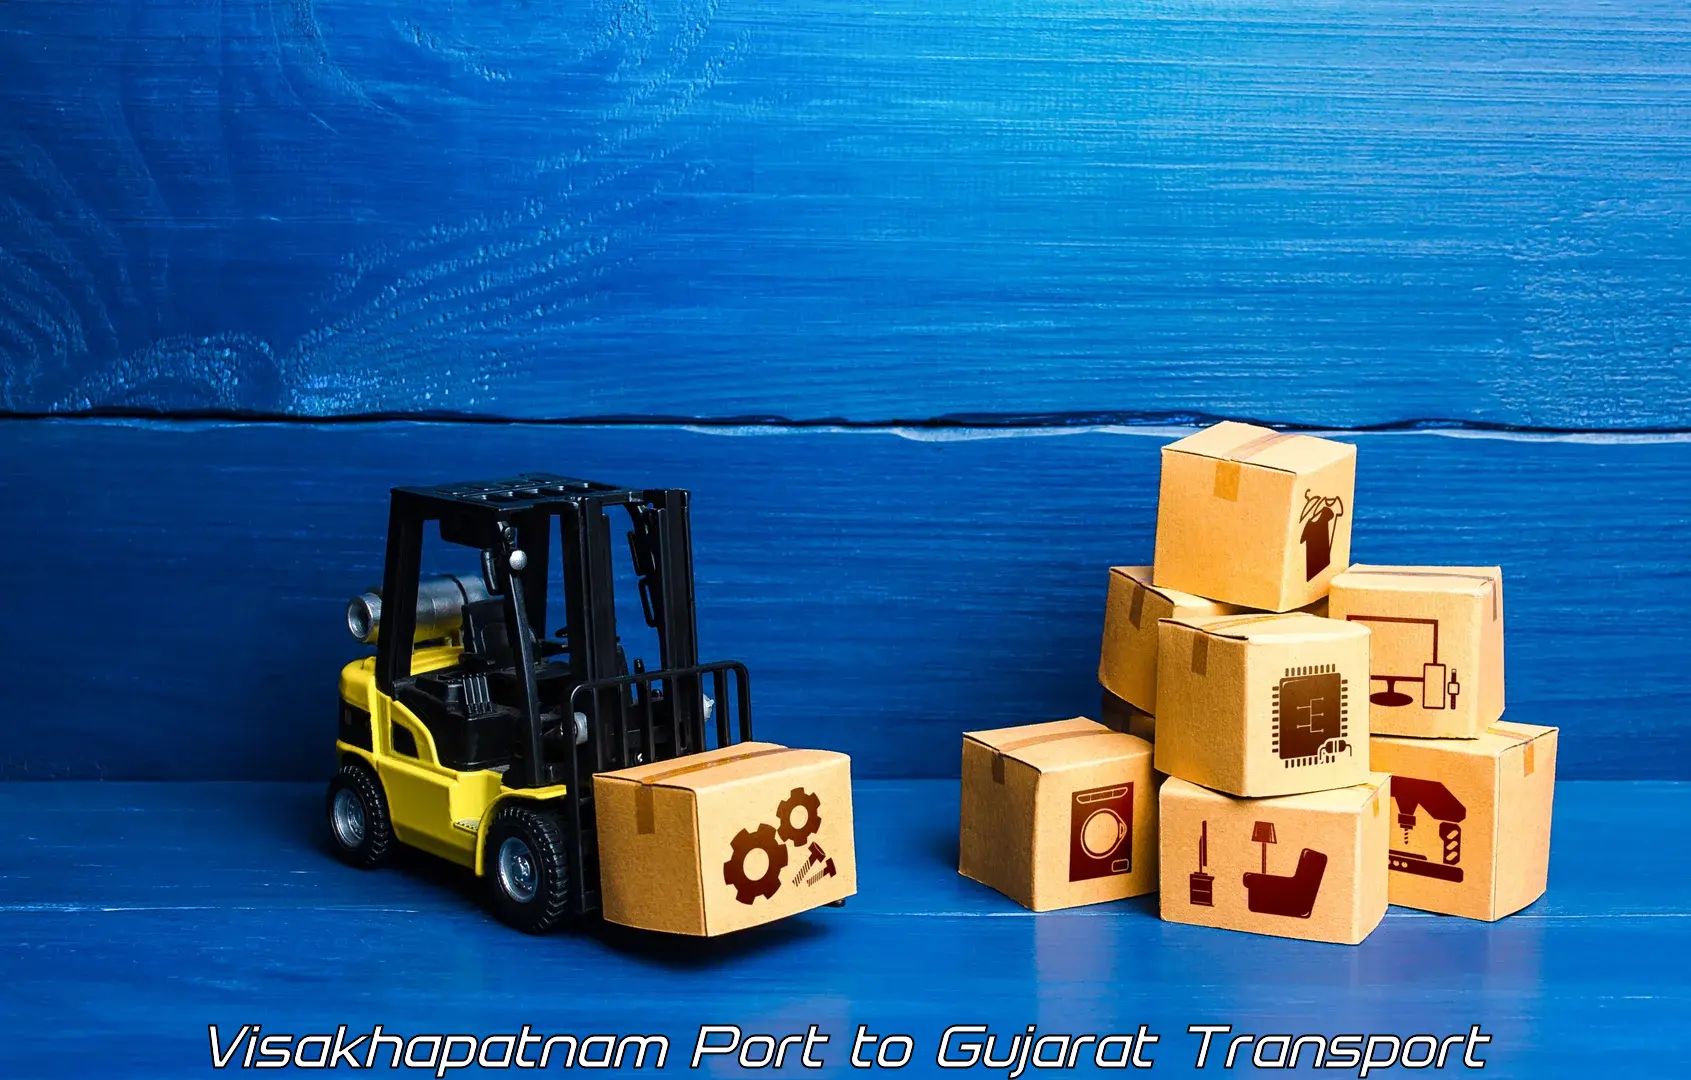 Transport bike from one state to another Visakhapatnam Port to Surat